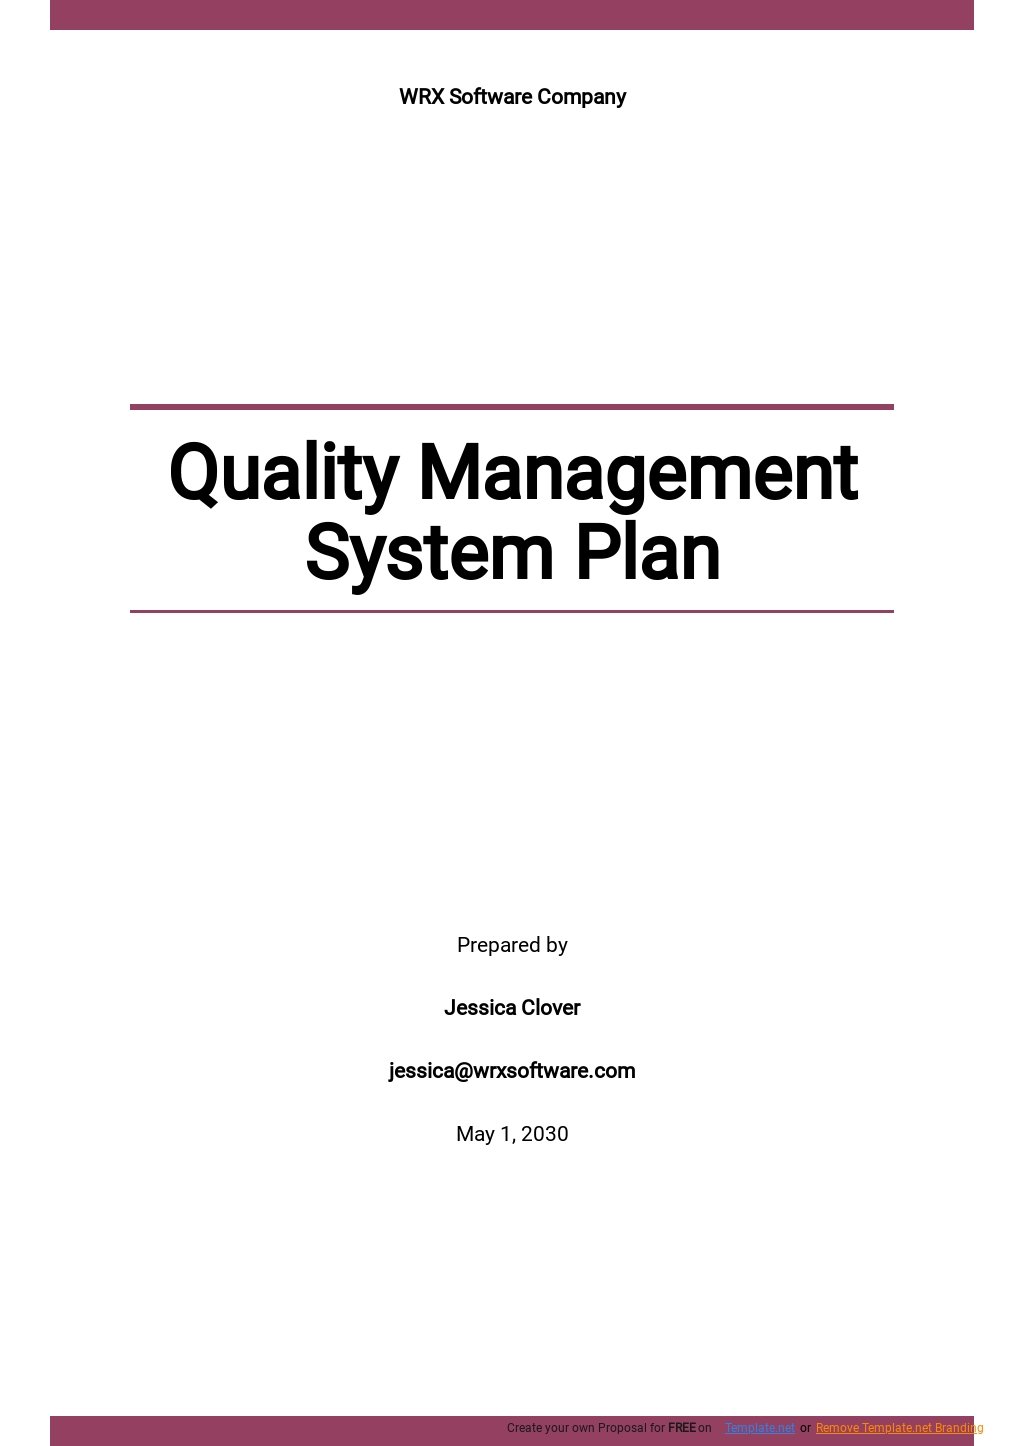 quality-management-system-plan-template-google-docs-word-apple